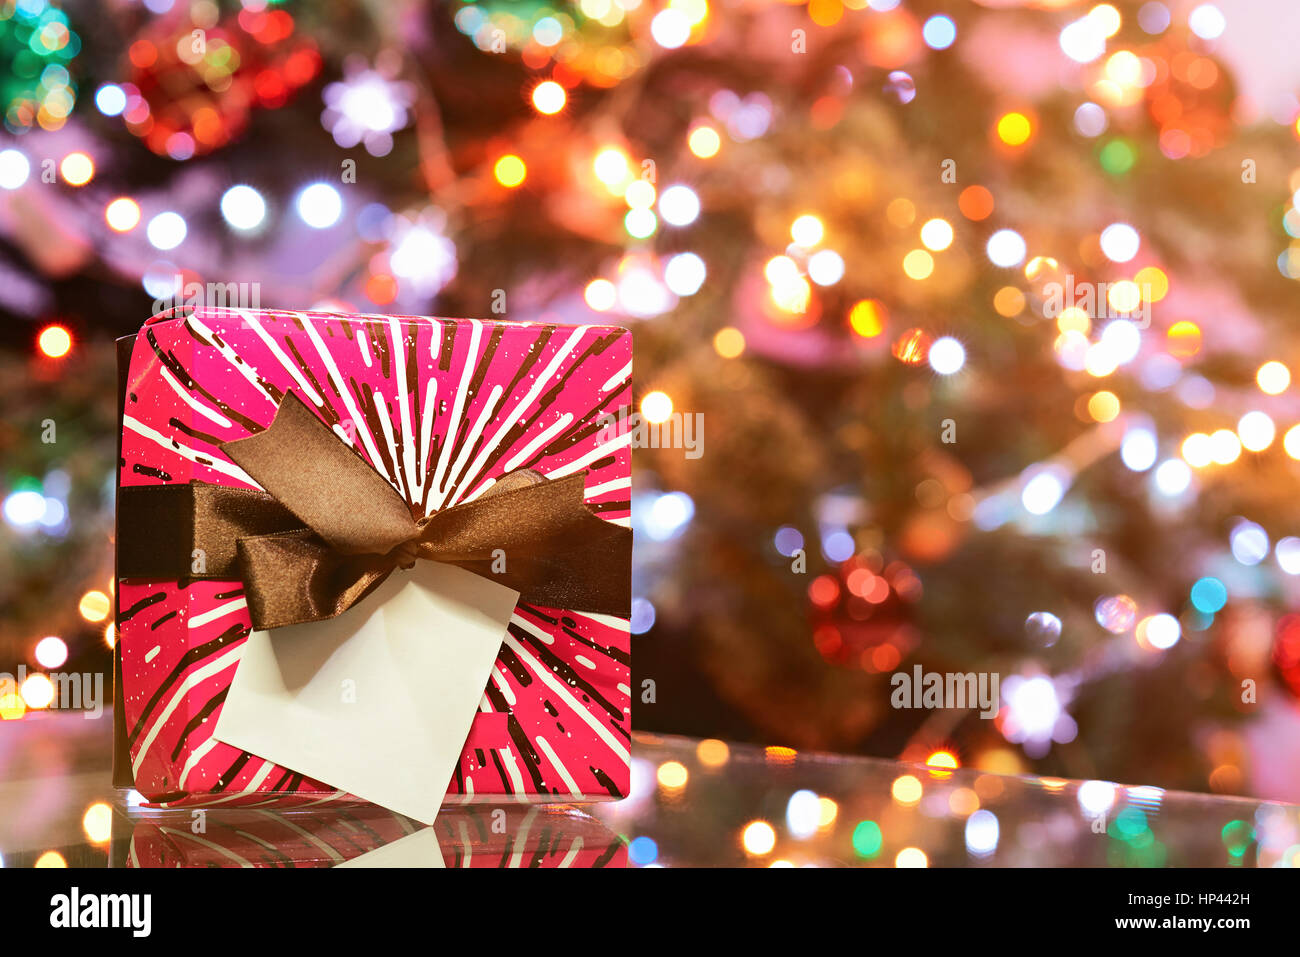 New year gift colourfull boxstand on glass table with blur background copy space Stock Photo